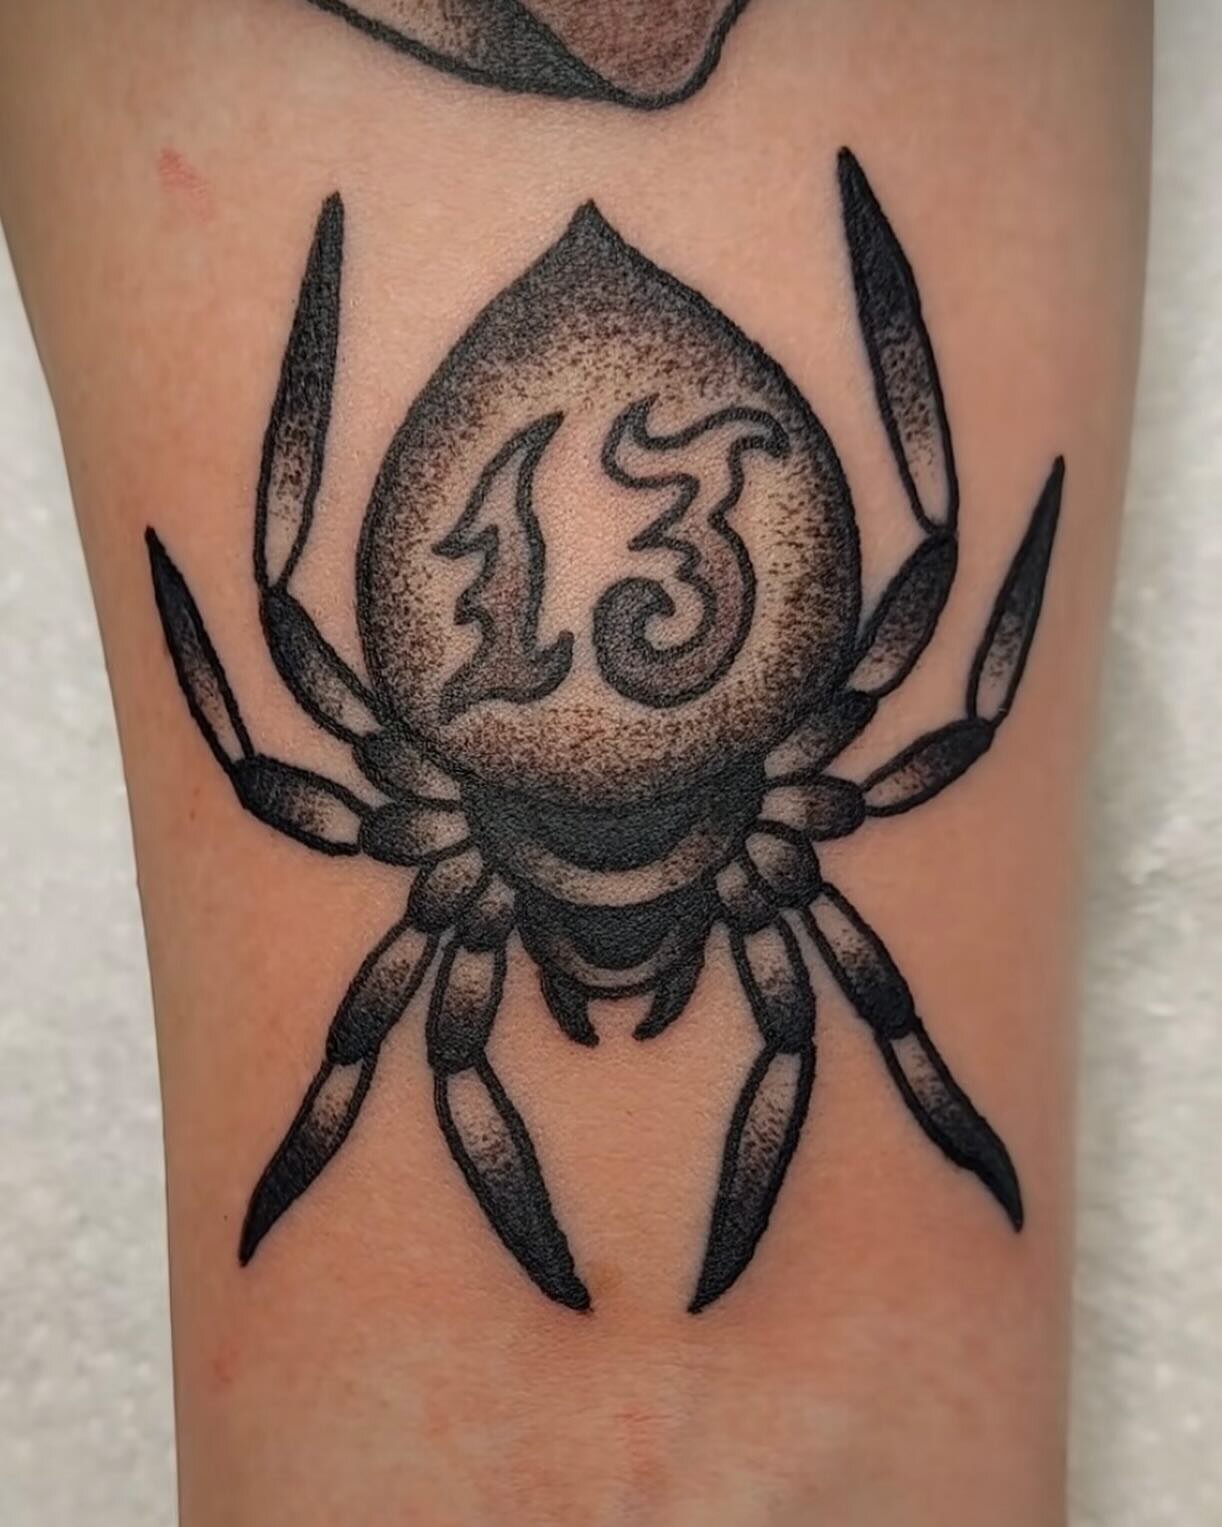 Unlucky spider by @elliotxtattoo 🕷️
.
.
.
.
.
.
.
.
.
Newcastle under Lyme appointment only tattoo studio, DM or contact the artist directly for enquiries.
.
#tattoo #traditionaltattoo #blackworktattoo #spidertattoo #13tattoo #linework #uktattoo #uk